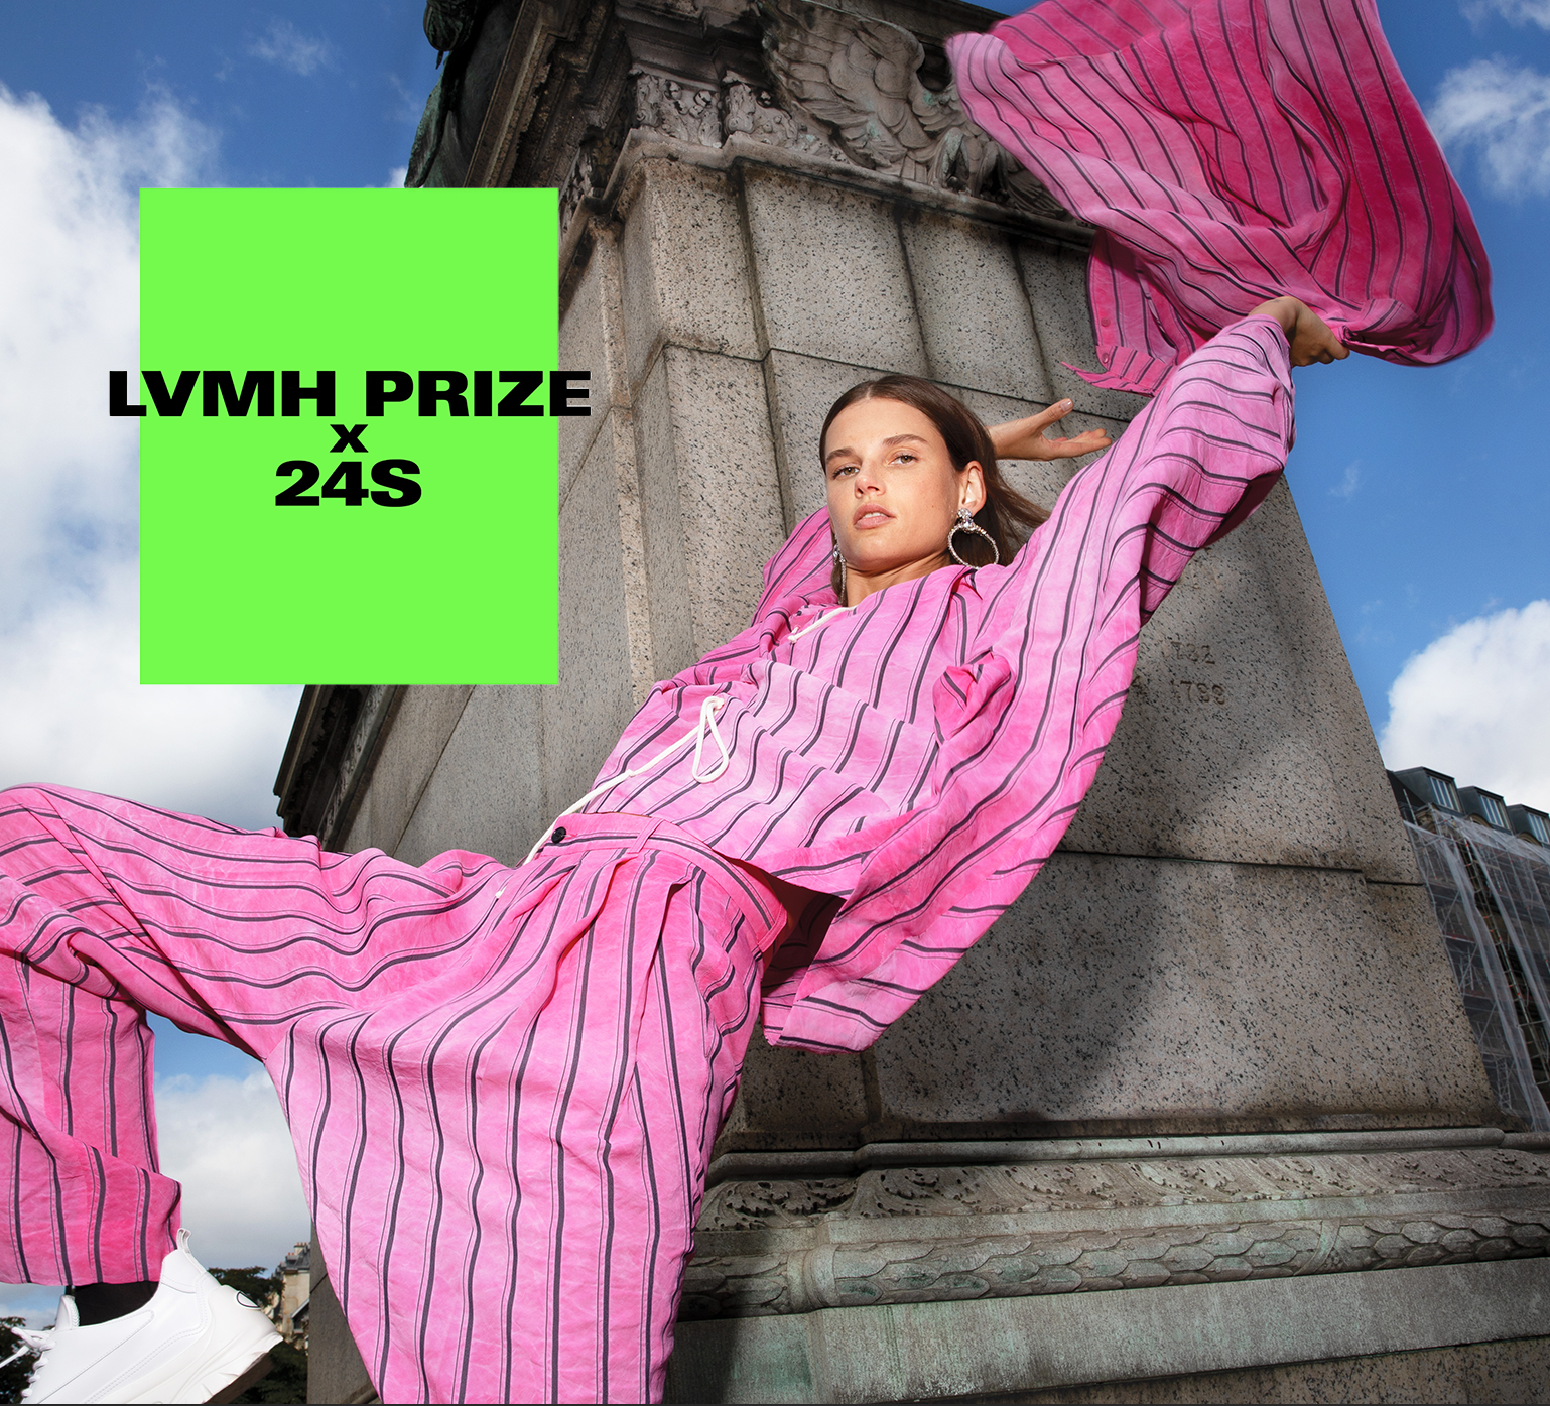 Finalist of the LVMH Prize 2019, Emily Adams Bode attends 24S News Photo  - Getty Images